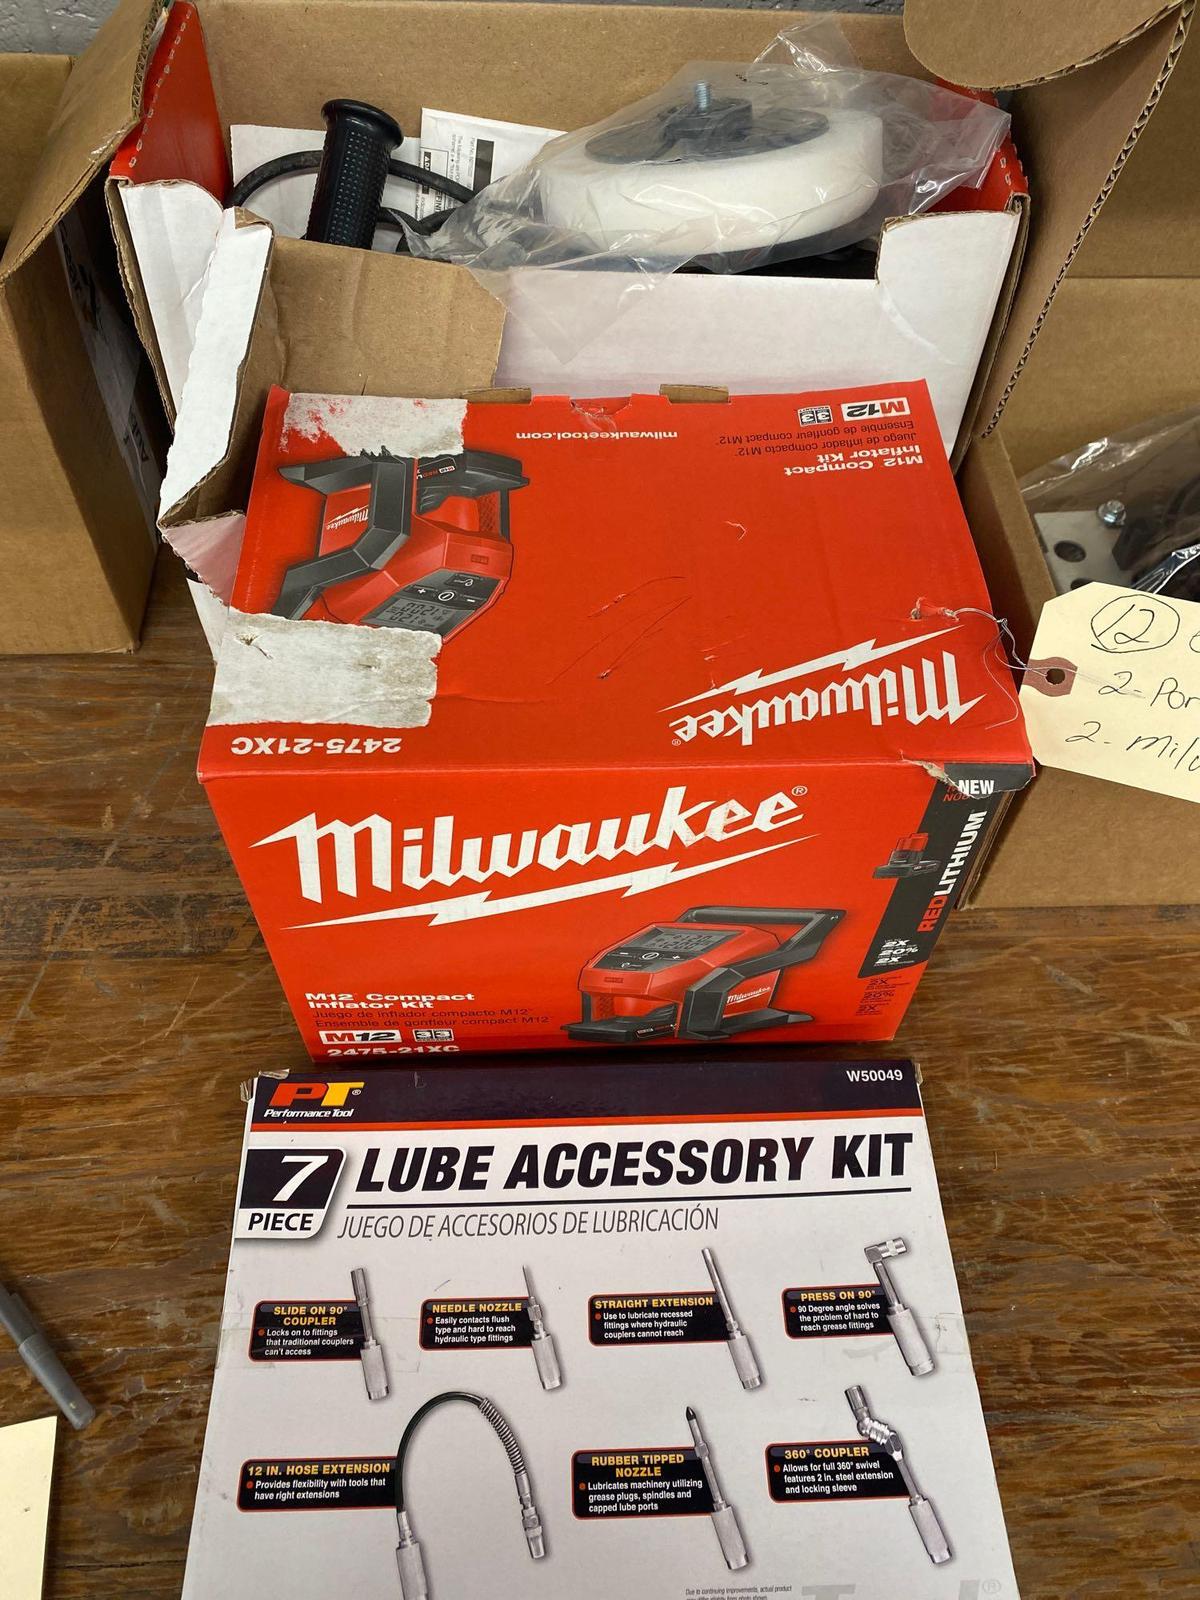 Group of tools 2 porter cable polisher 2 Milwaukee tools